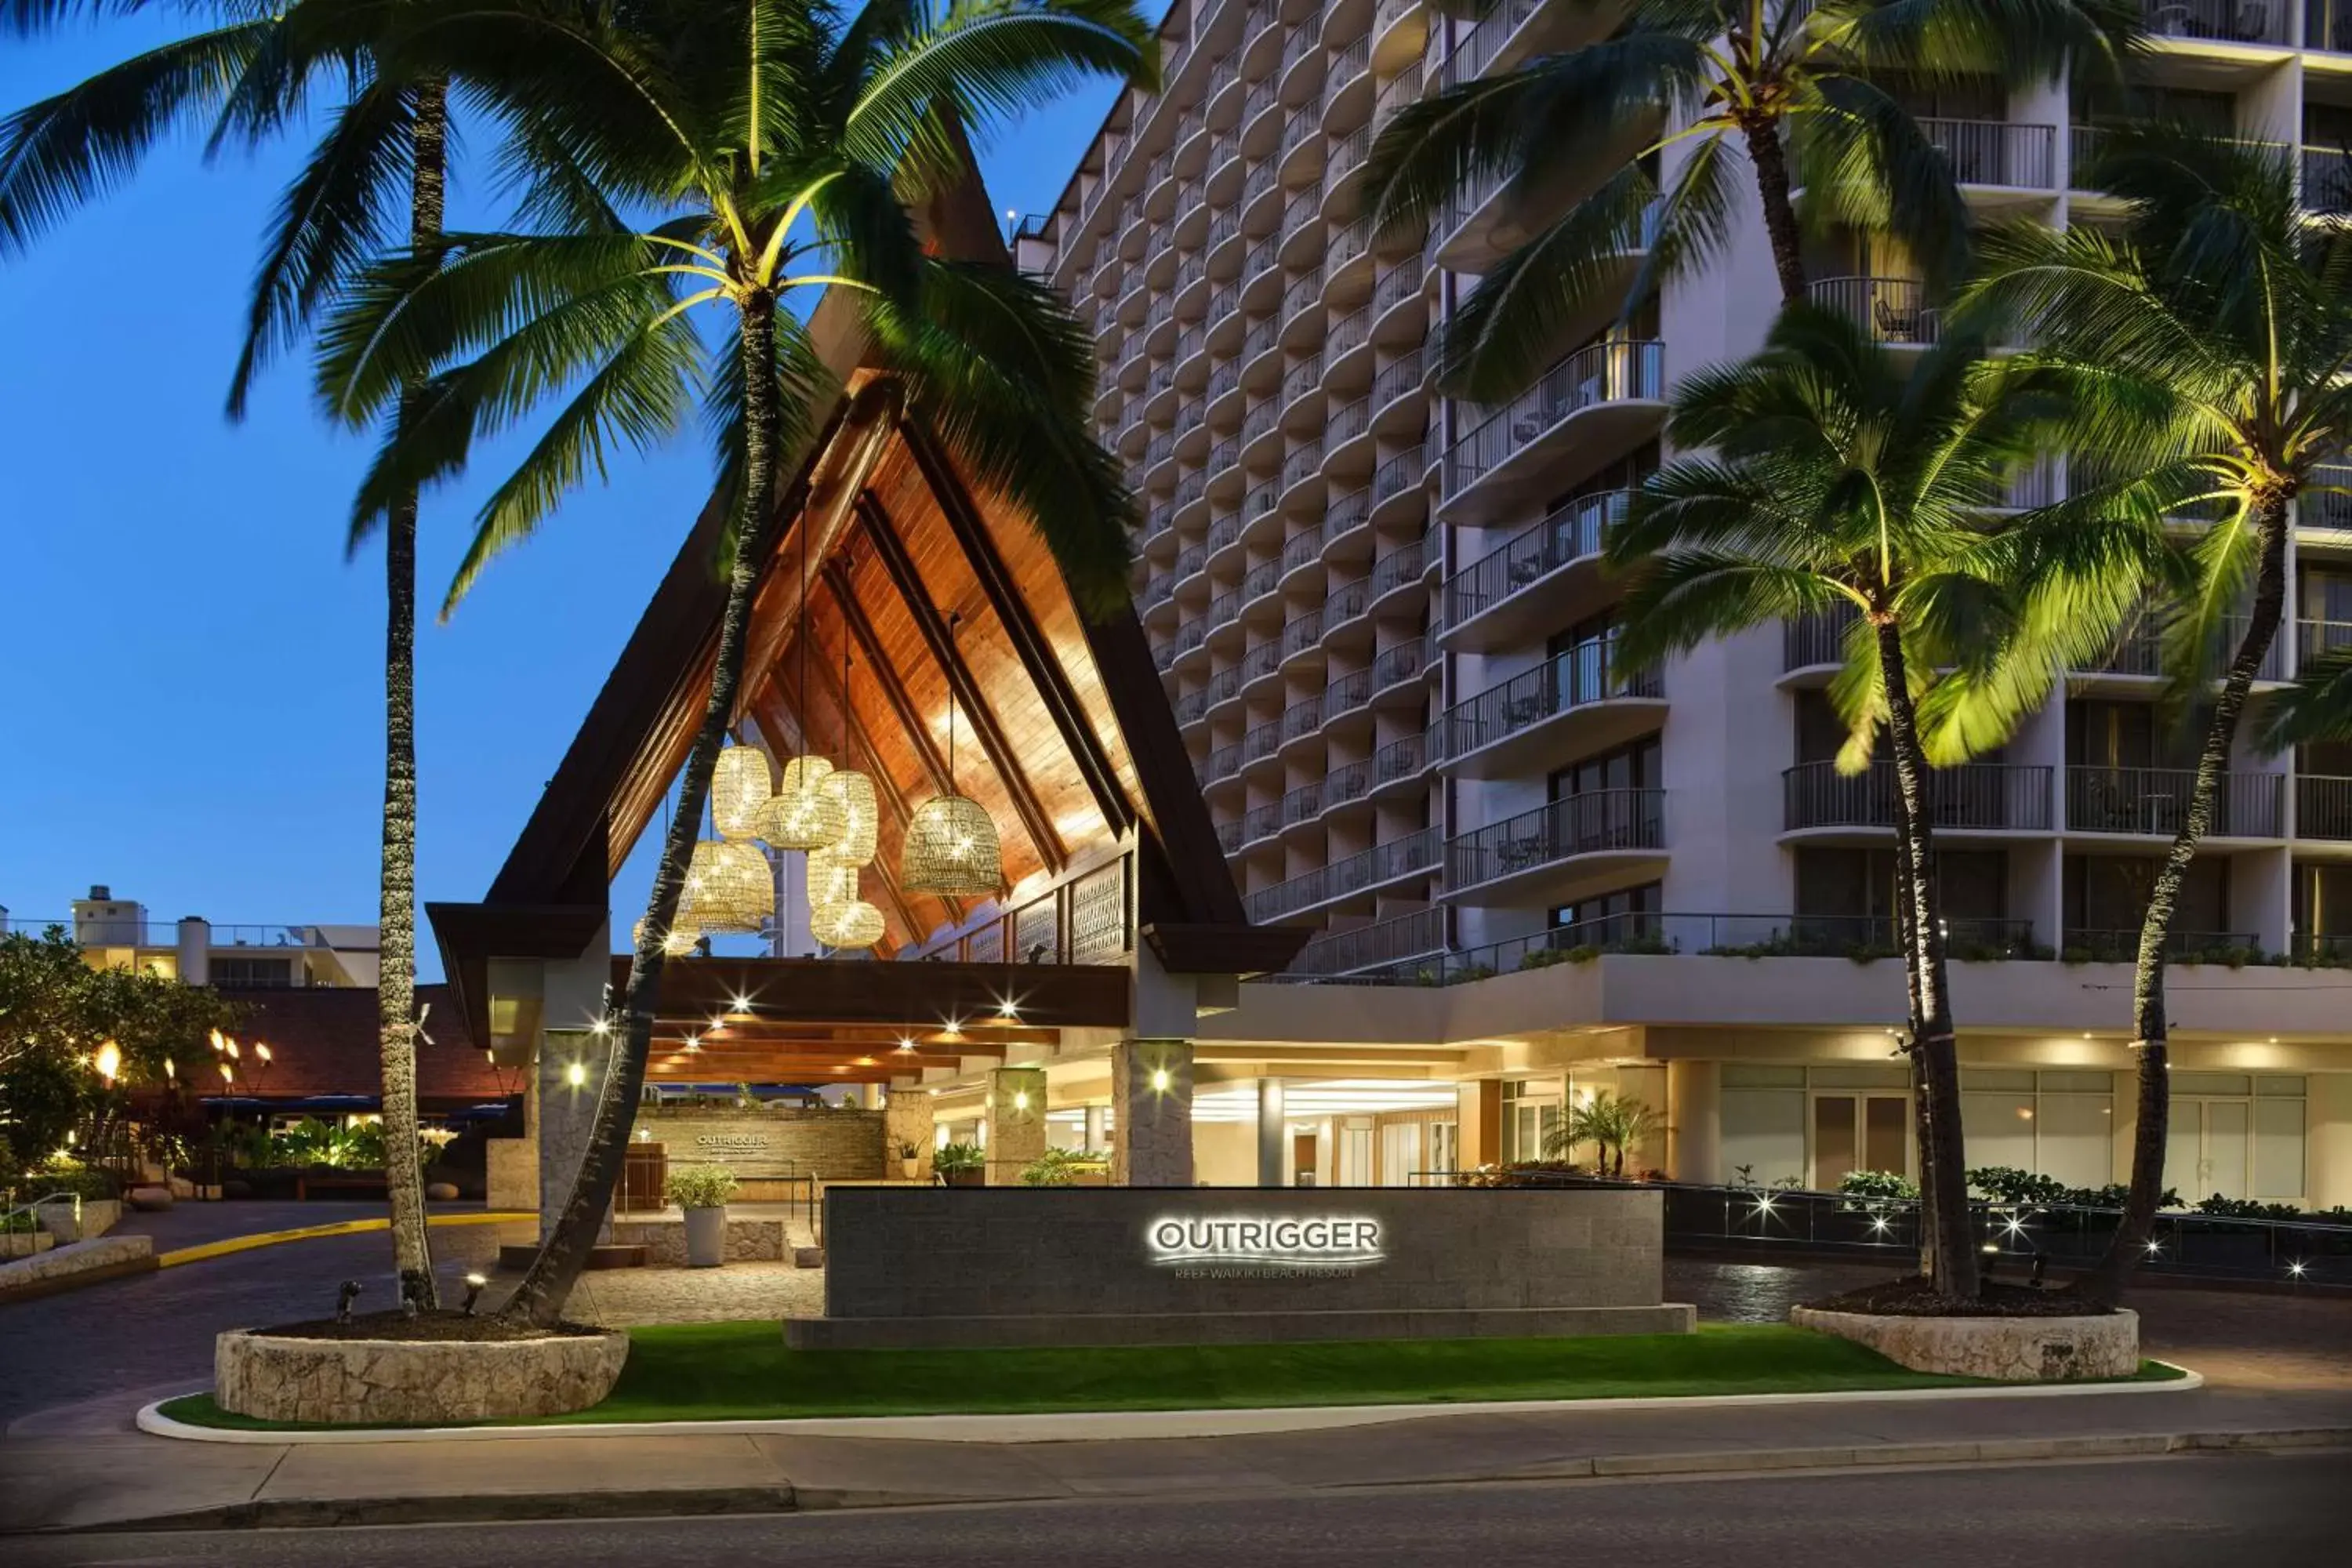 Property Building in OUTRIGGER Reef Waikiki Beach Resort